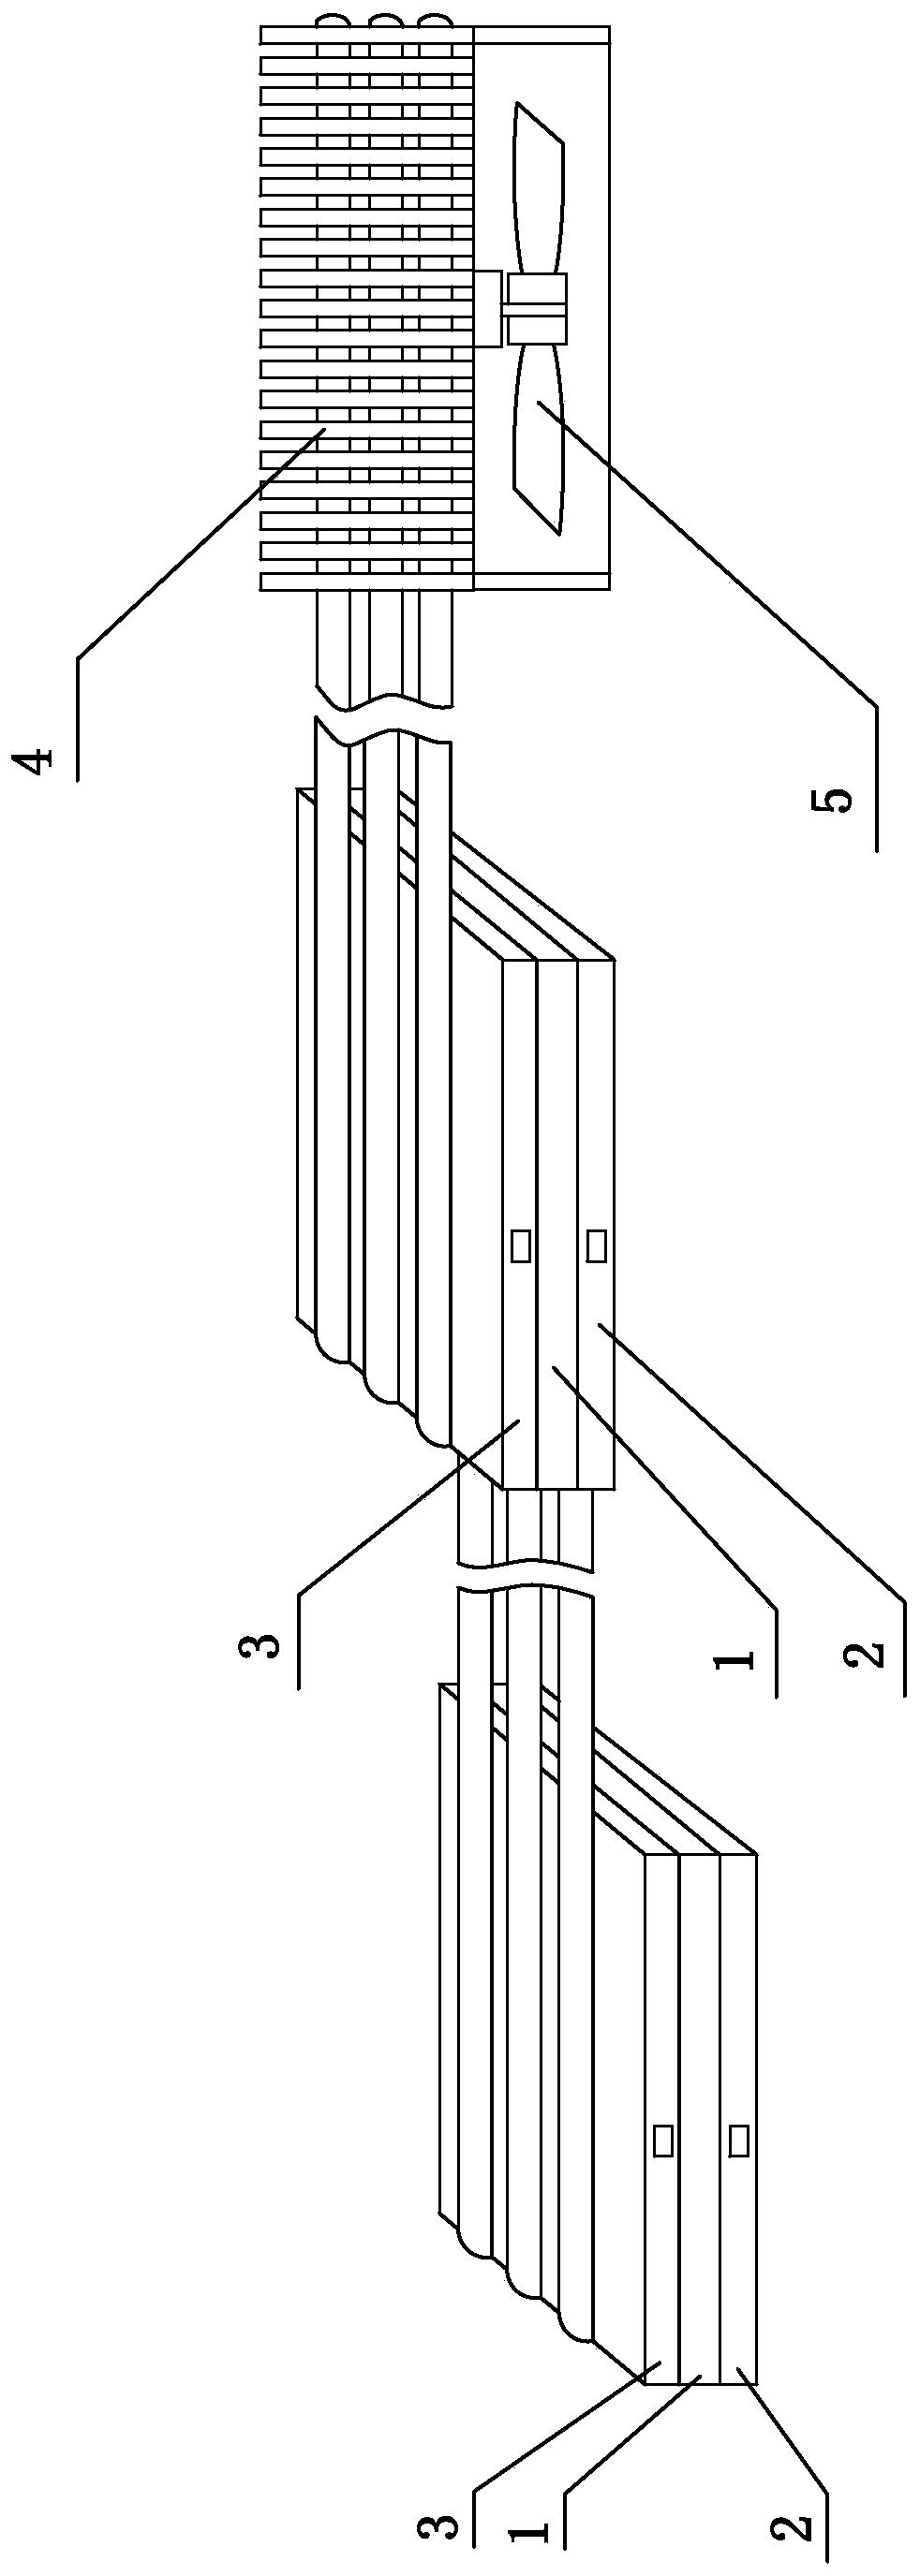 Heat dissipation control method of heat dissipation system for projector